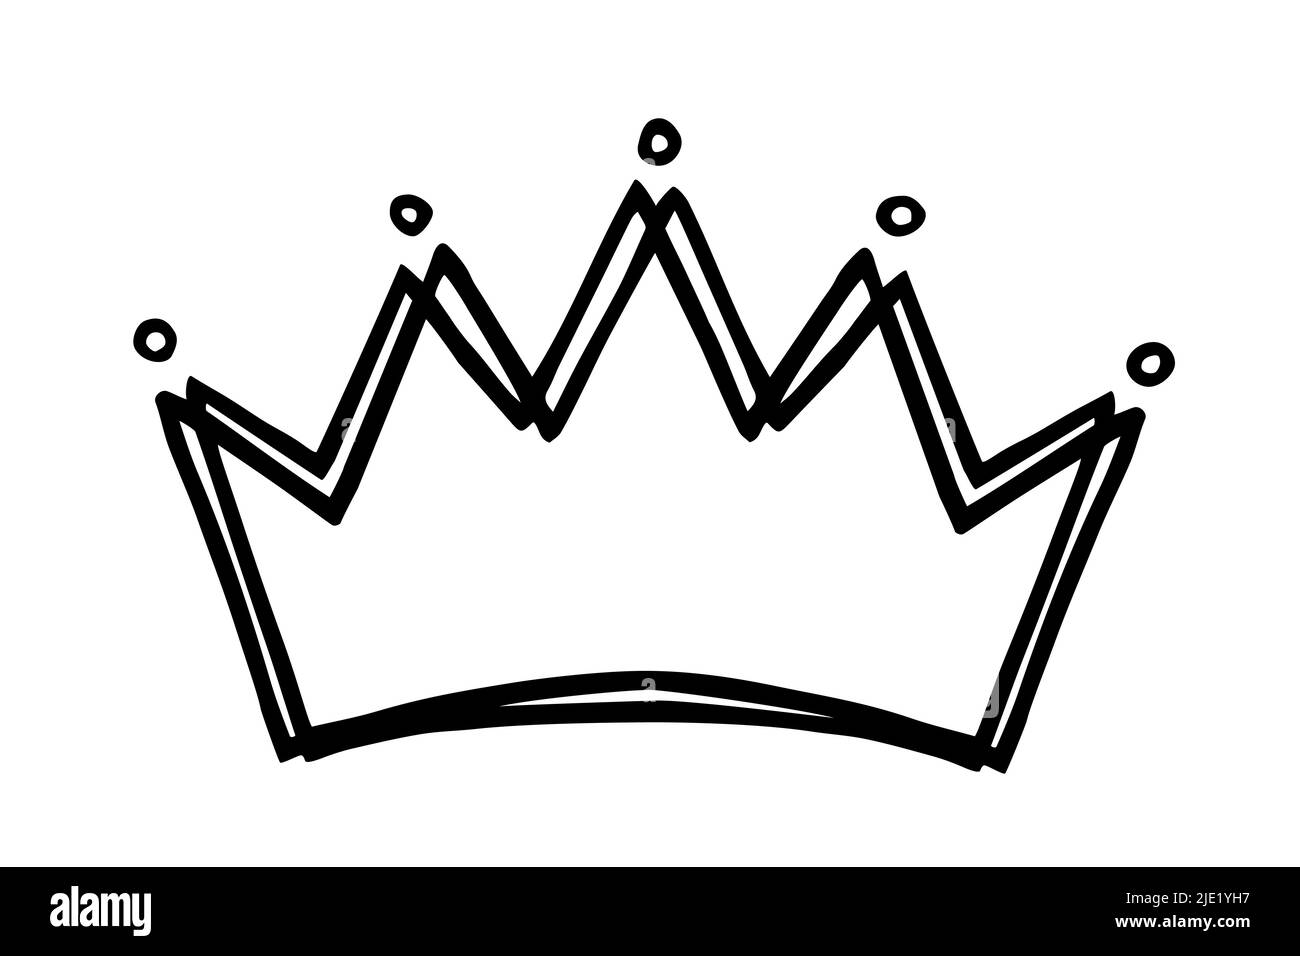 Hand drawn stylized crown design hand painted with ink pen, isolated on ...